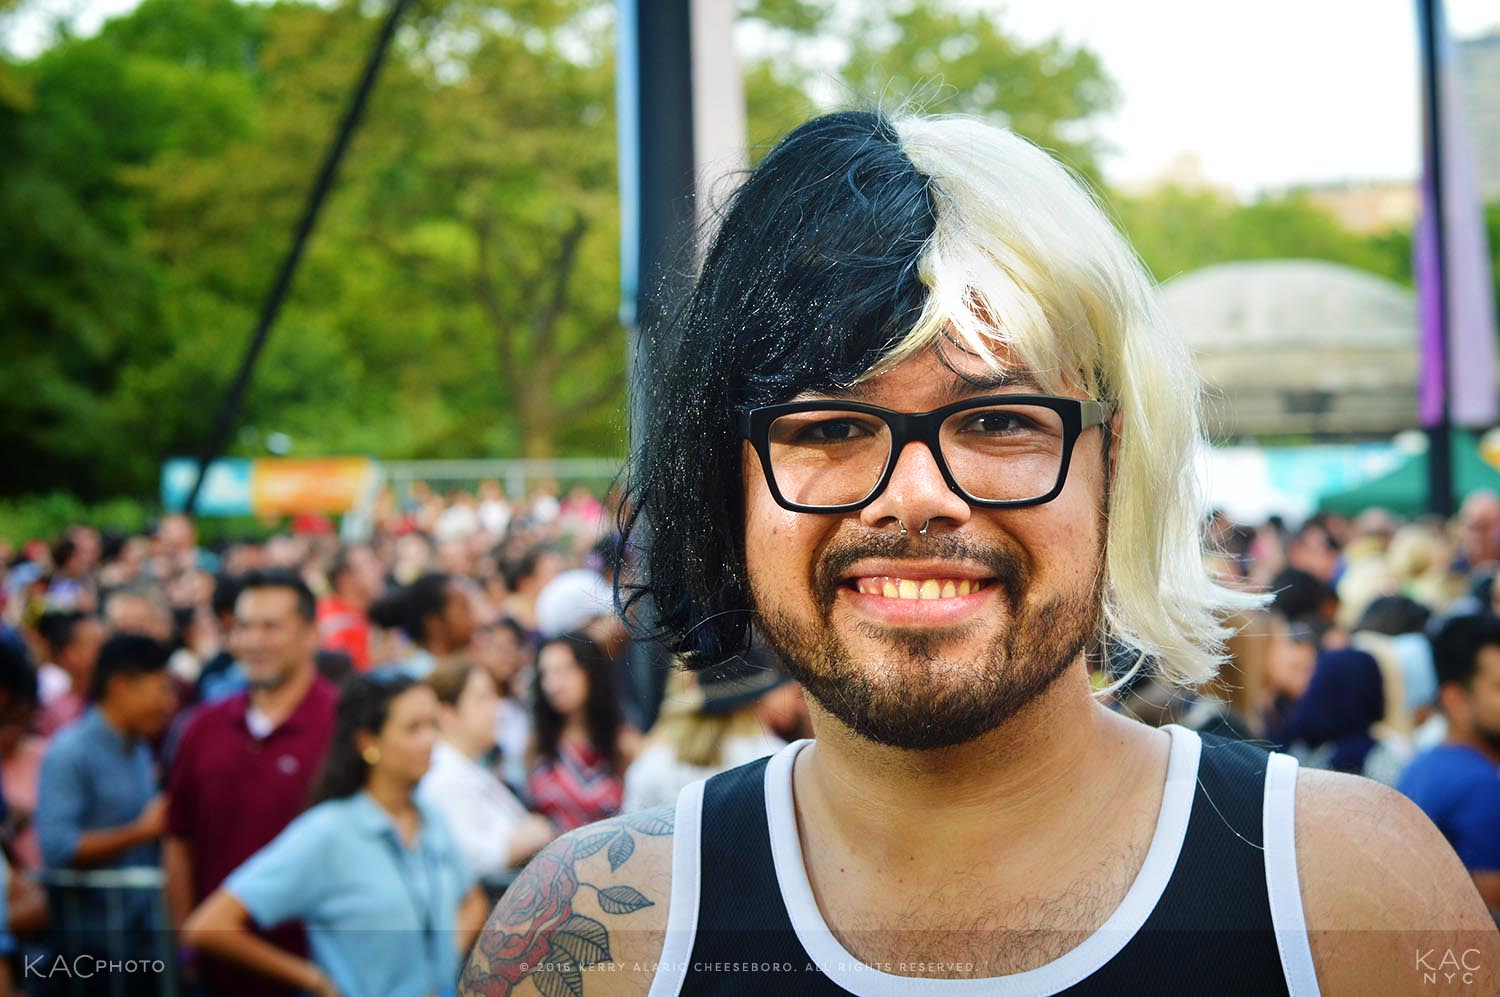 kac_photo-160722-event-sia-summerstage-young-man-wig-1500.jpg